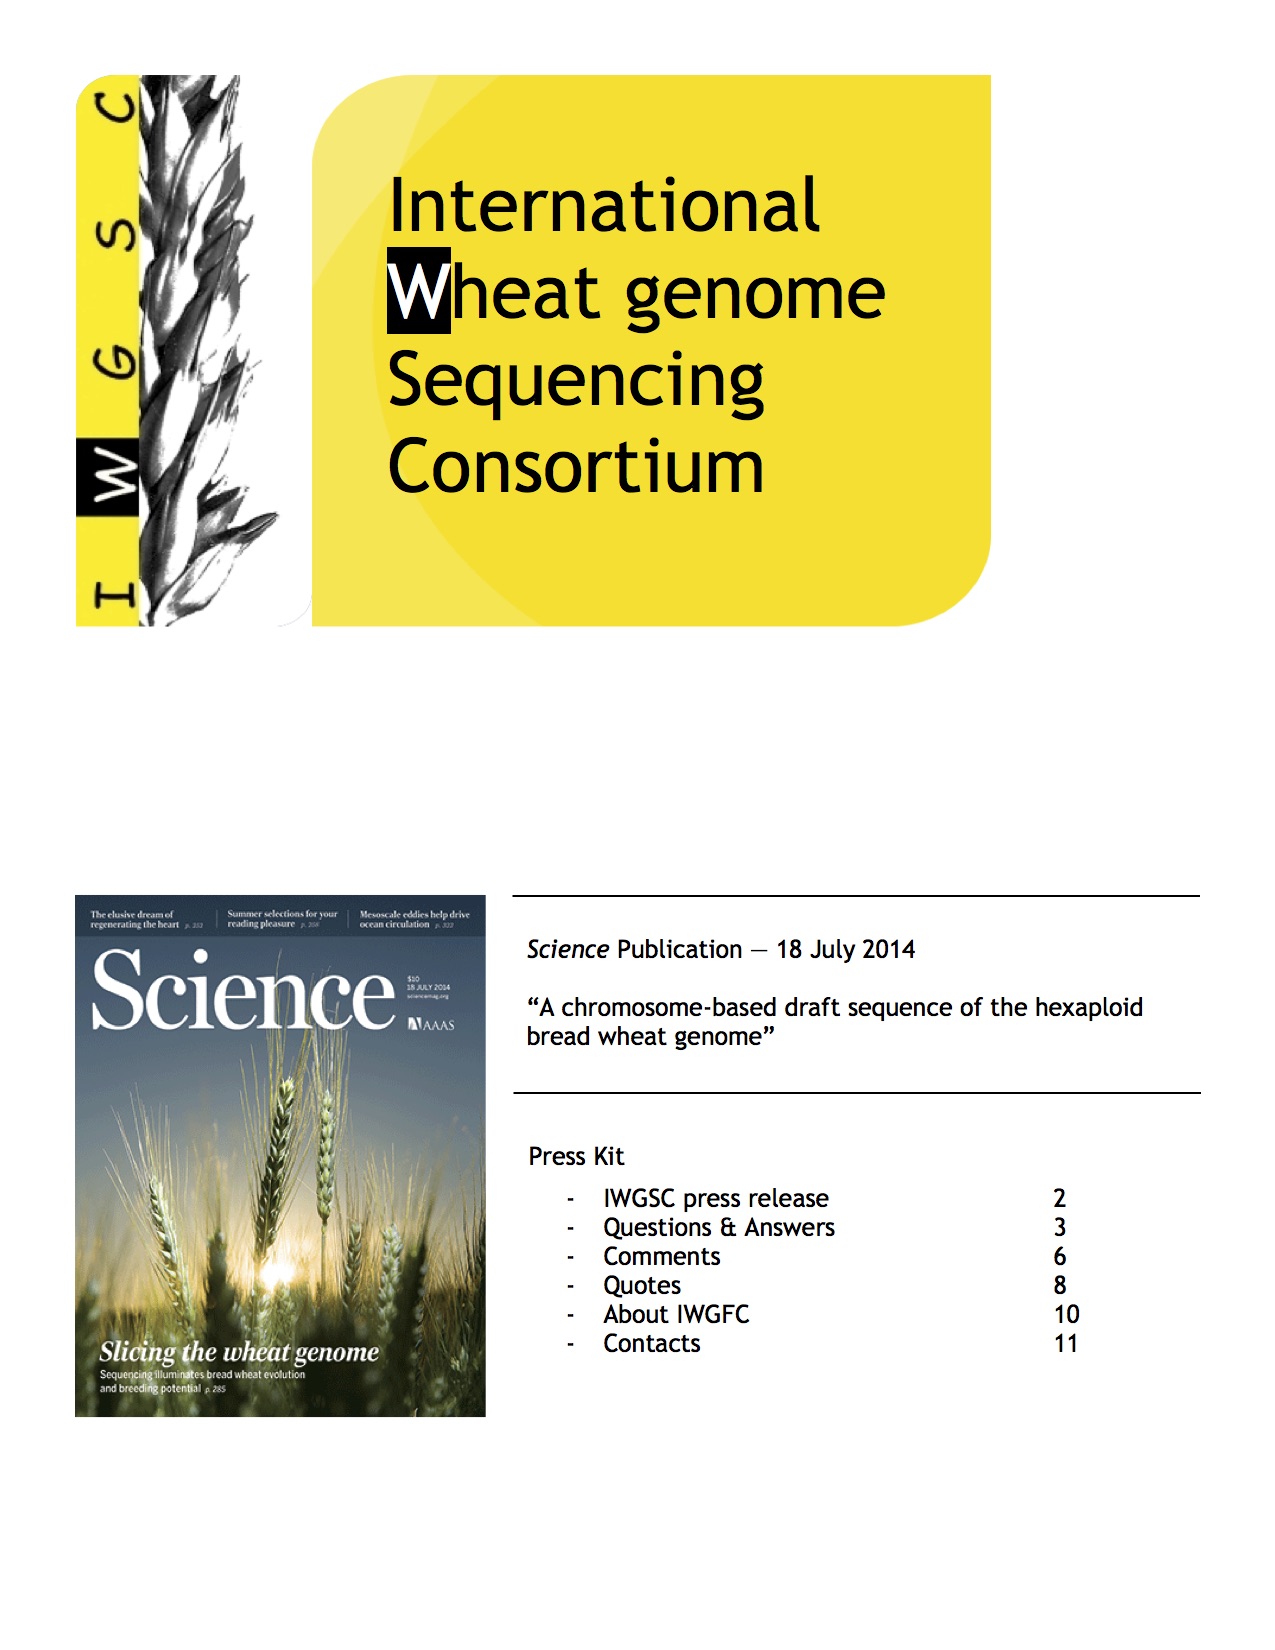 Media Kit - IWGSC Draft Wheat Genome Sequence Publication